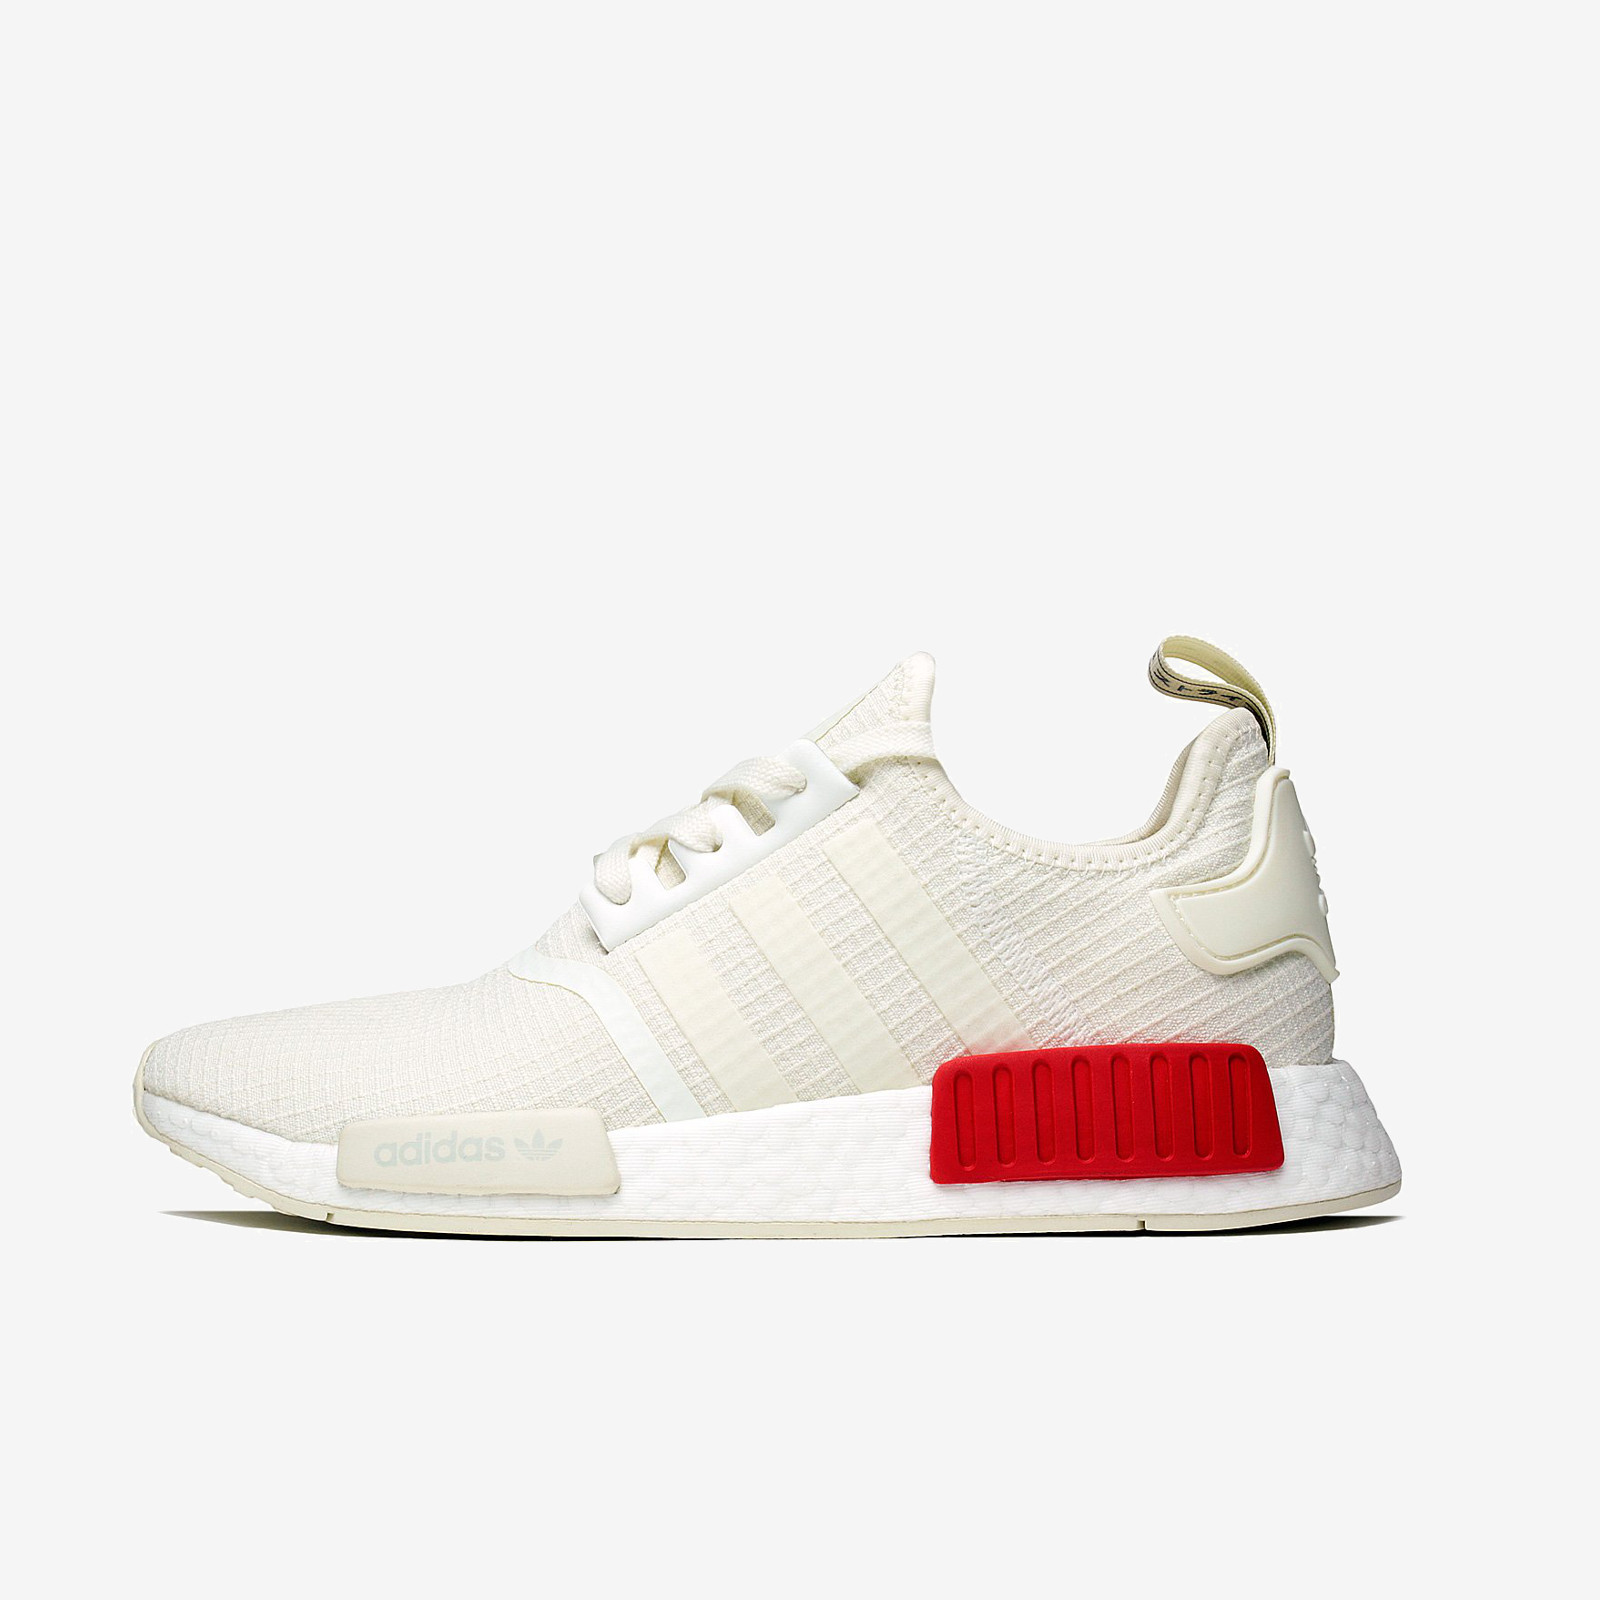 Invitere Datum se adidas white and red nmd online -